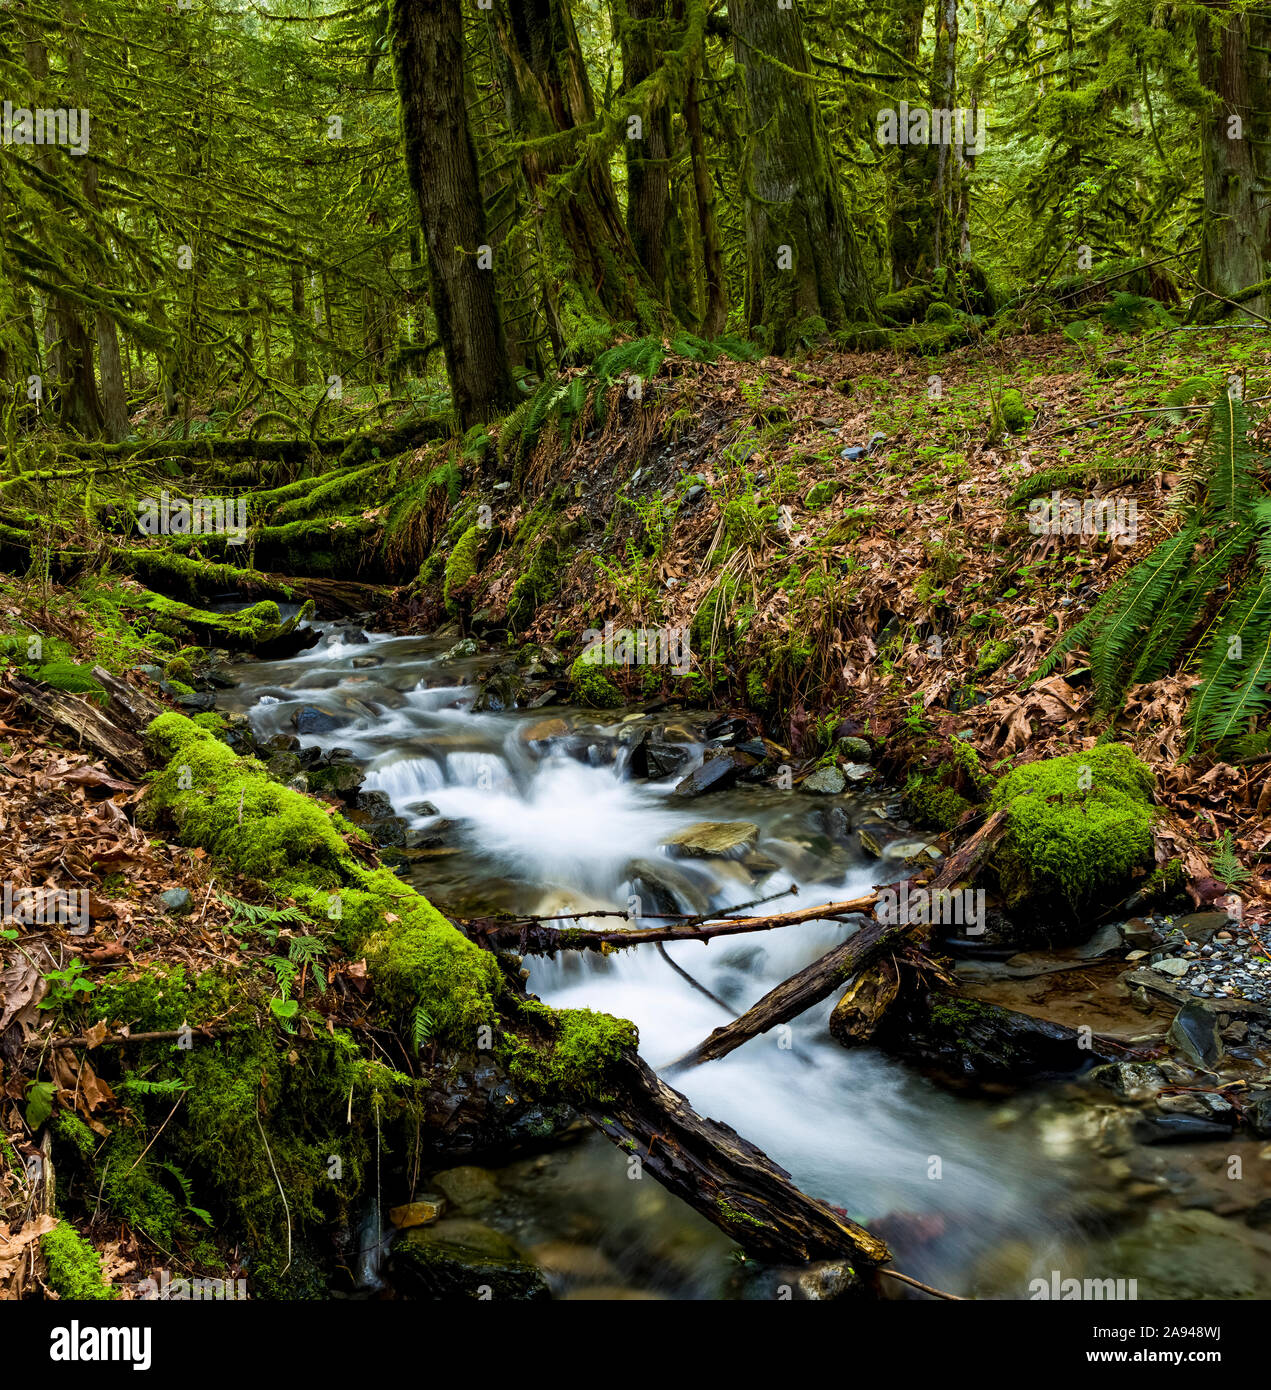 Creek flowing over rocks through a lush forest with moss-covered rocks and trees; Maple Ridge, British Columbia, Canada Stock Photo